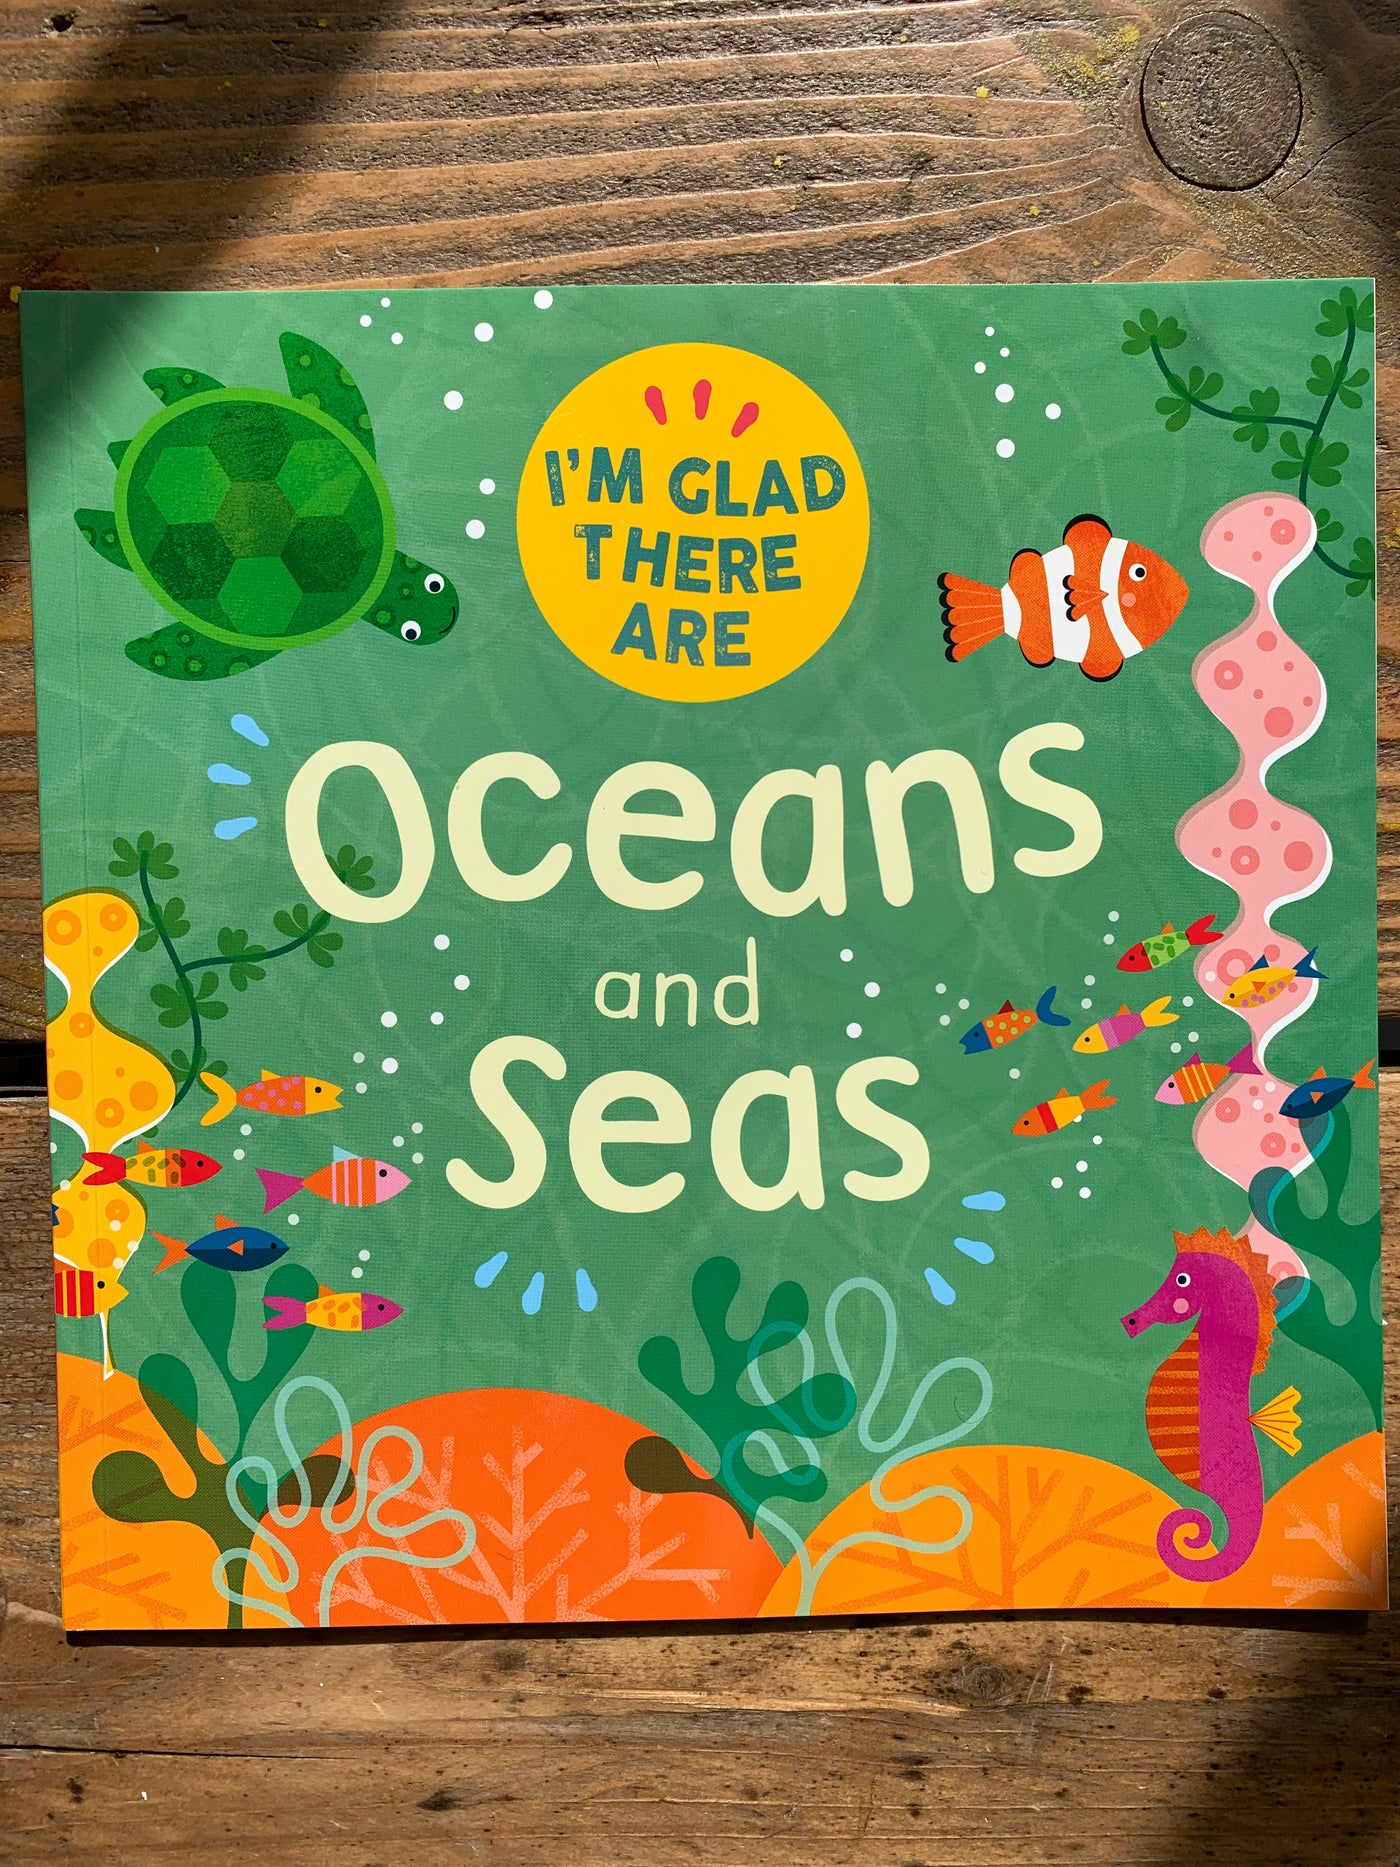 I'm Glad There Are: Oceans and Seas